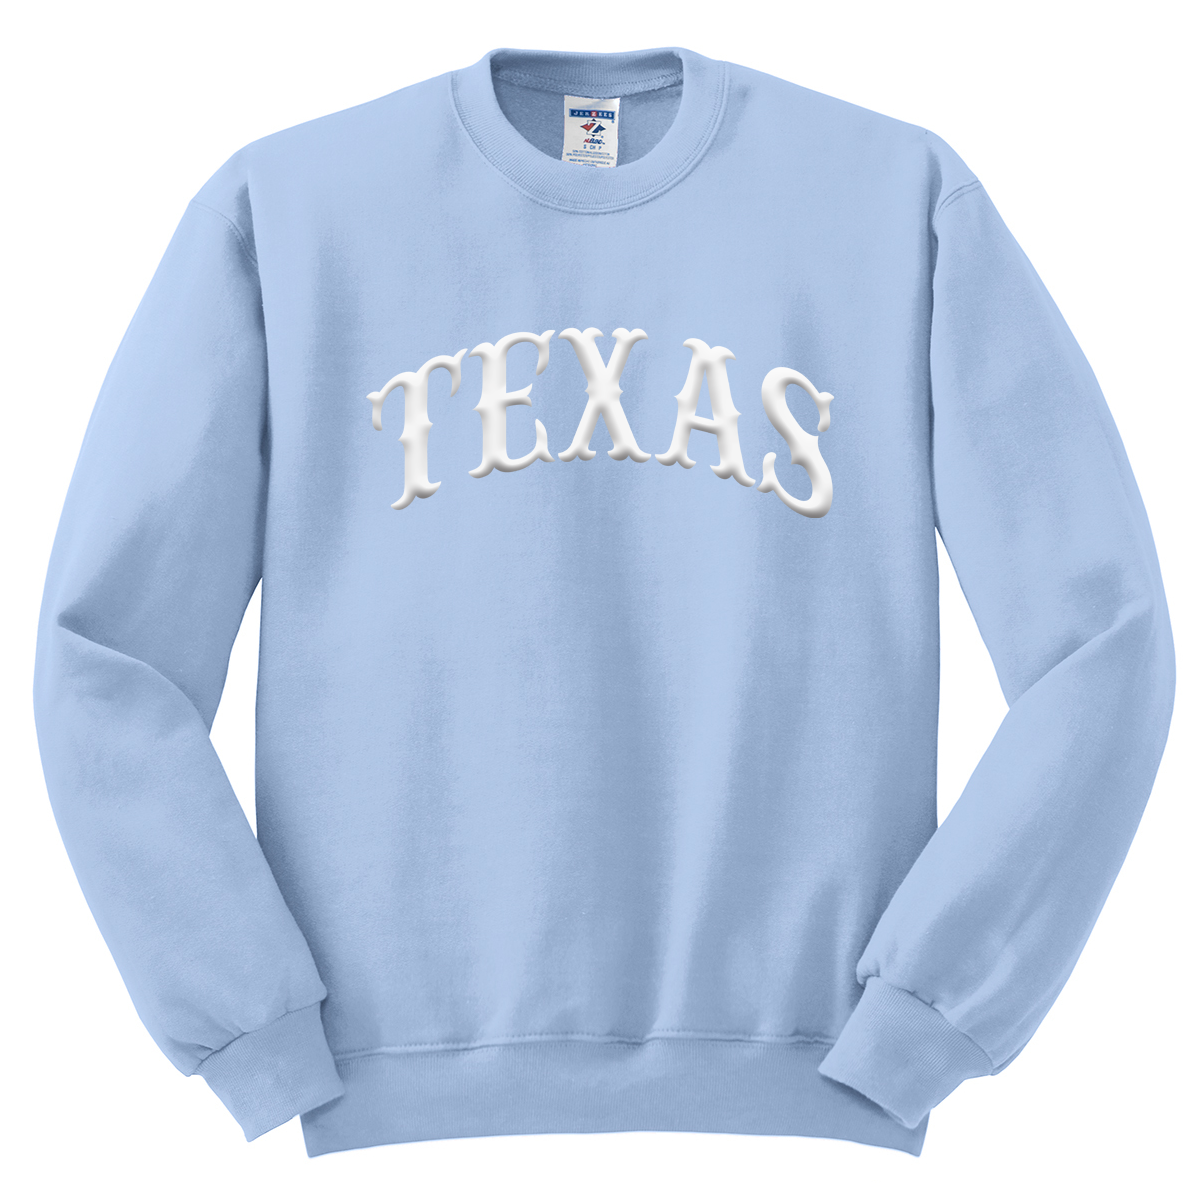 TEXAS PUFF SCREENPRINT ON A GILDAN CREWNECK FLEECE SWEATER WESTERN STYLE LIGHT BLUE COLOR WITH A WHITE INK ARCH TEXAS GRAPHIC